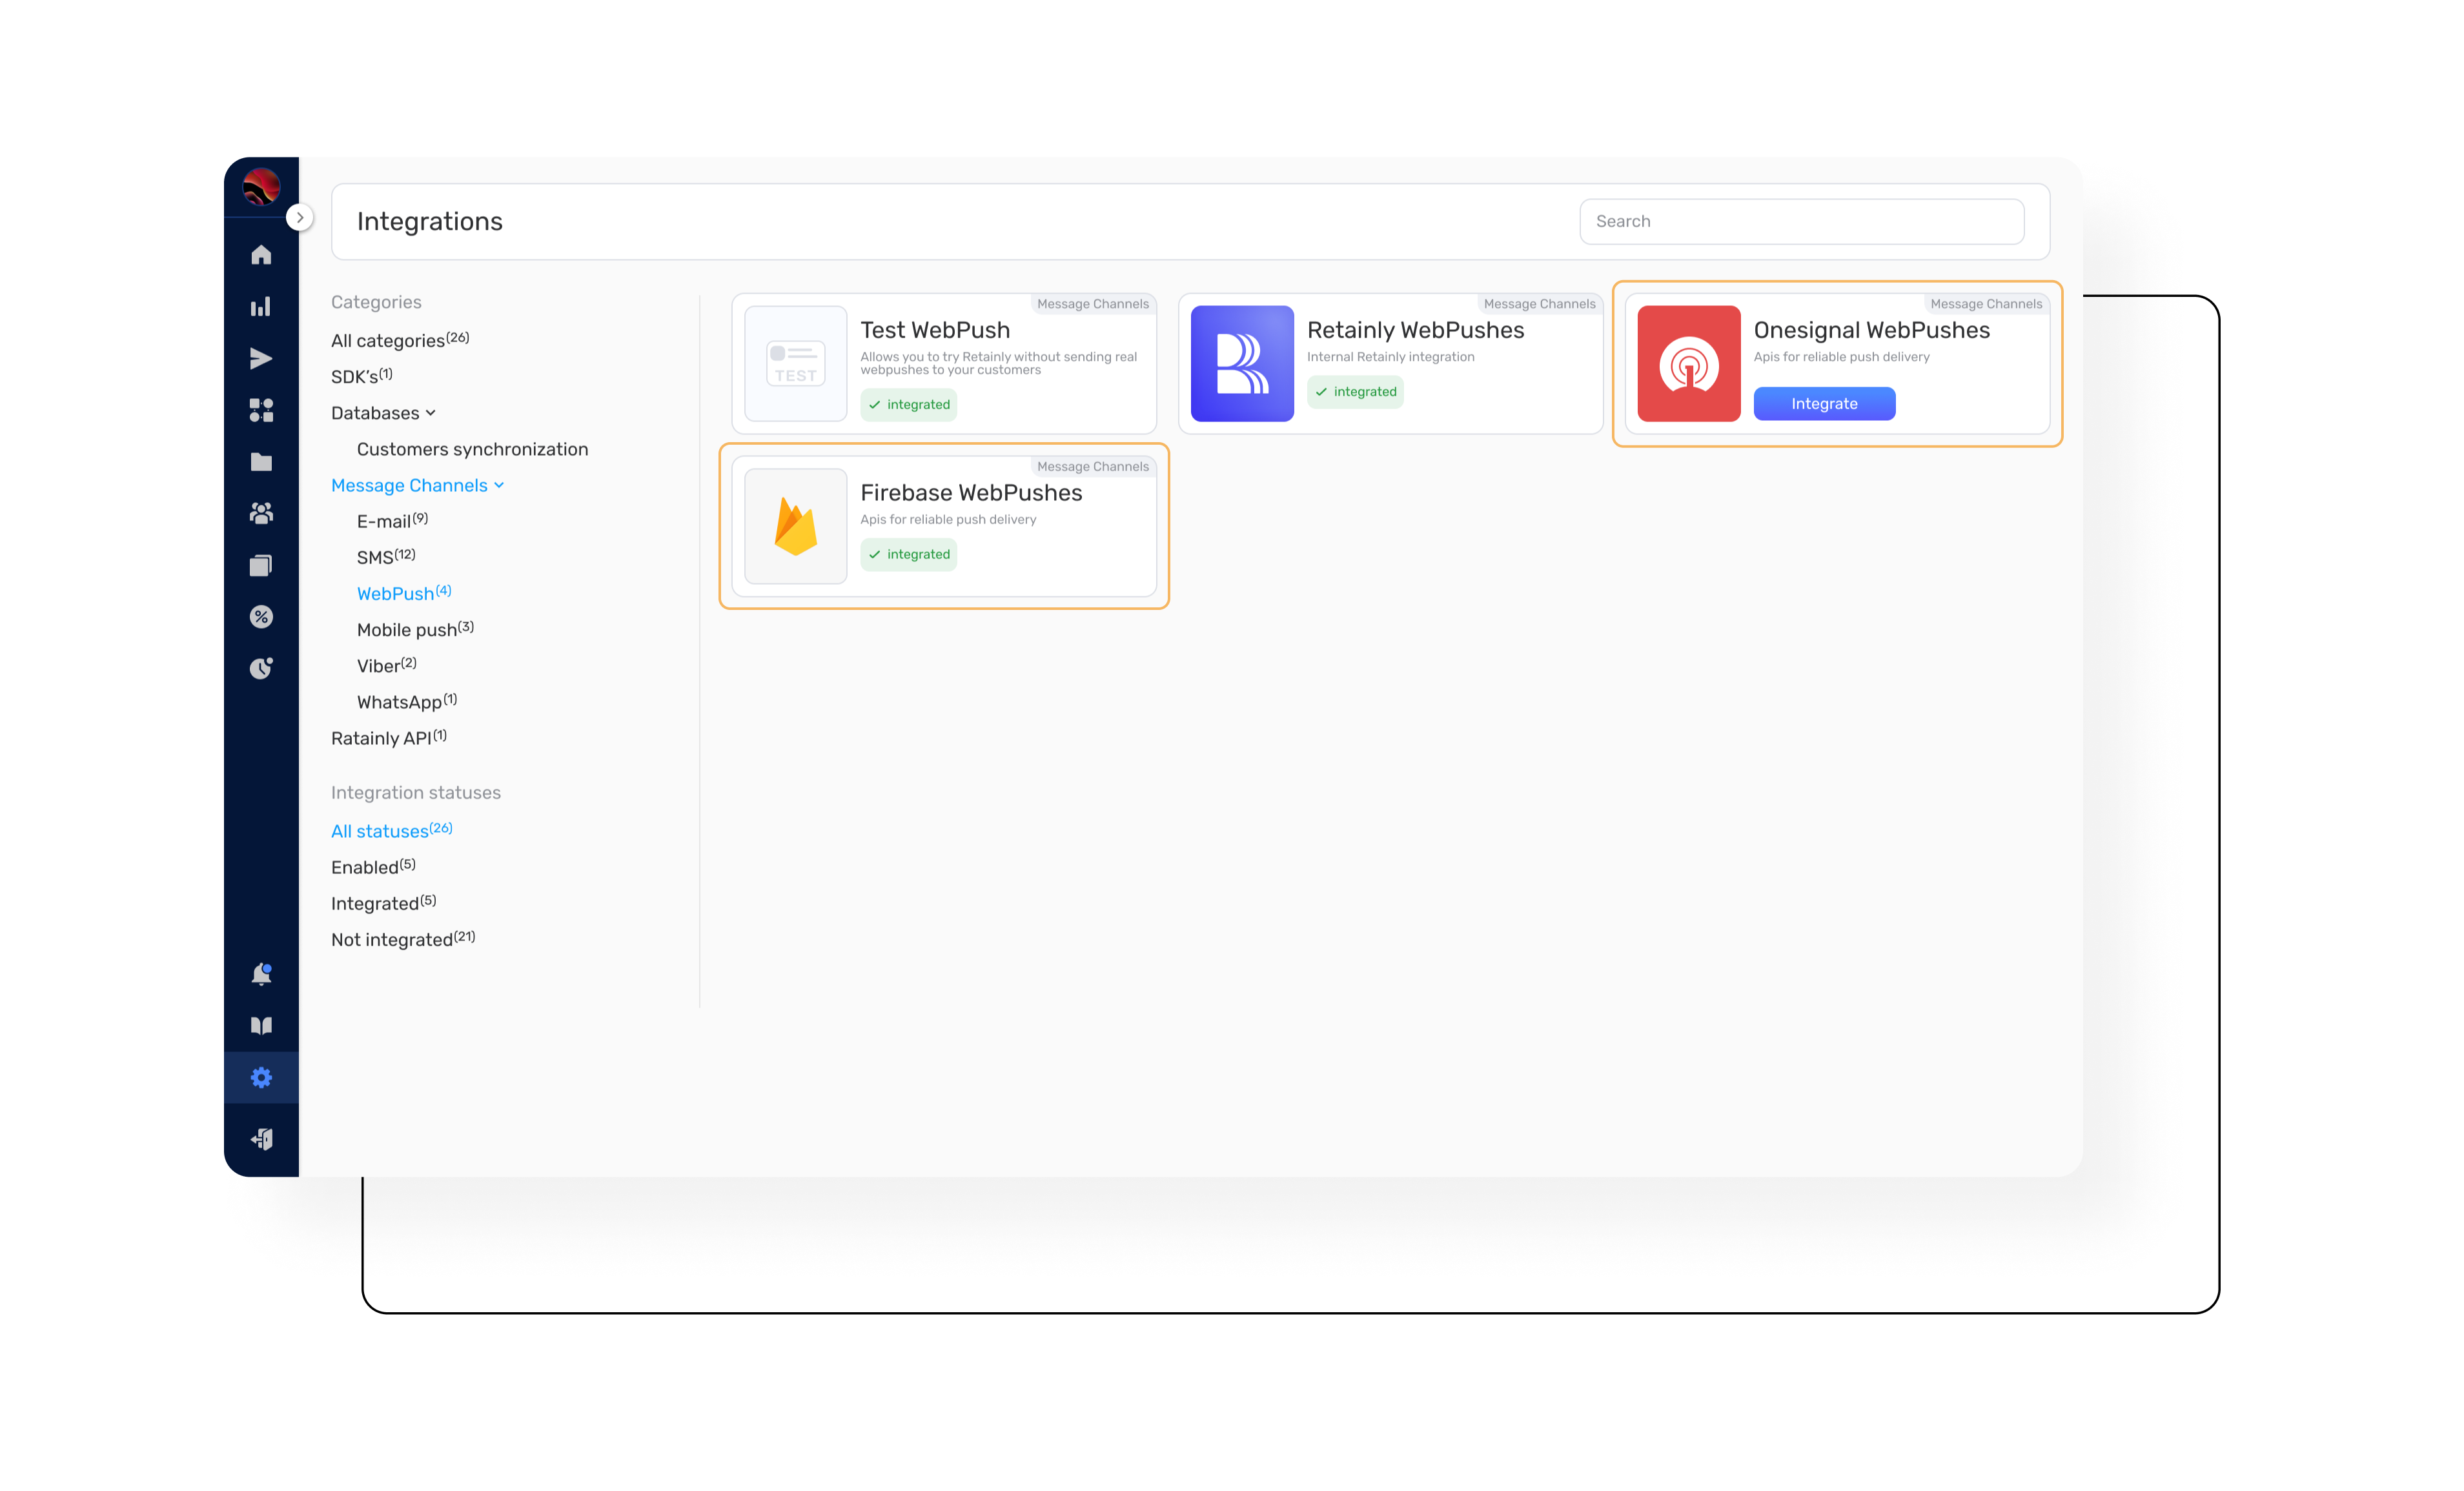 You can also set up your website on OneSignal or Google Firebase and use their APIs to integrate their web-push services